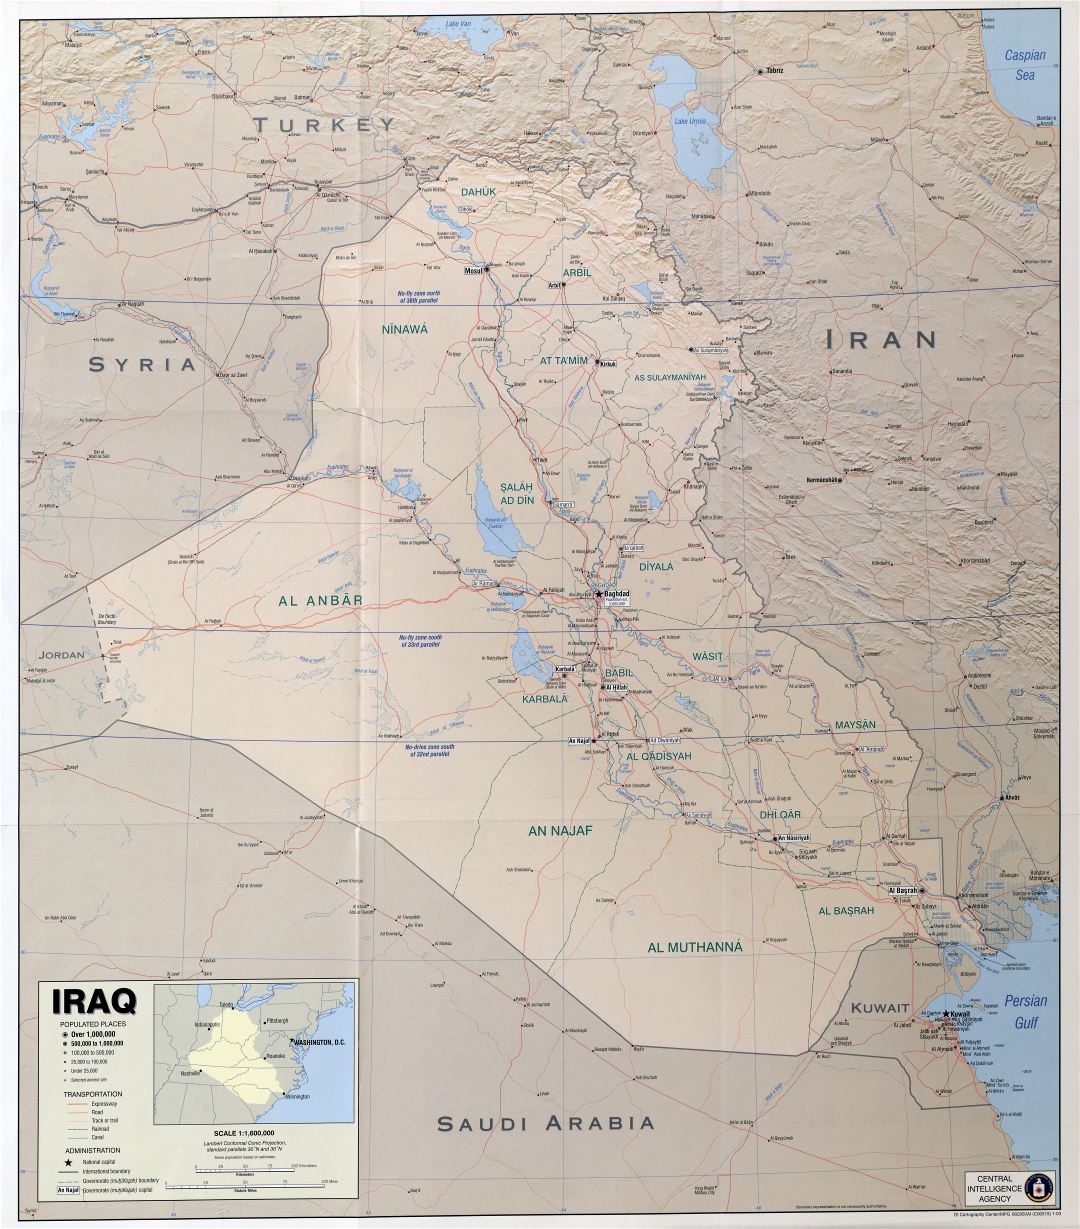 Large scale political map of Iraq with relief and other marks - 2003